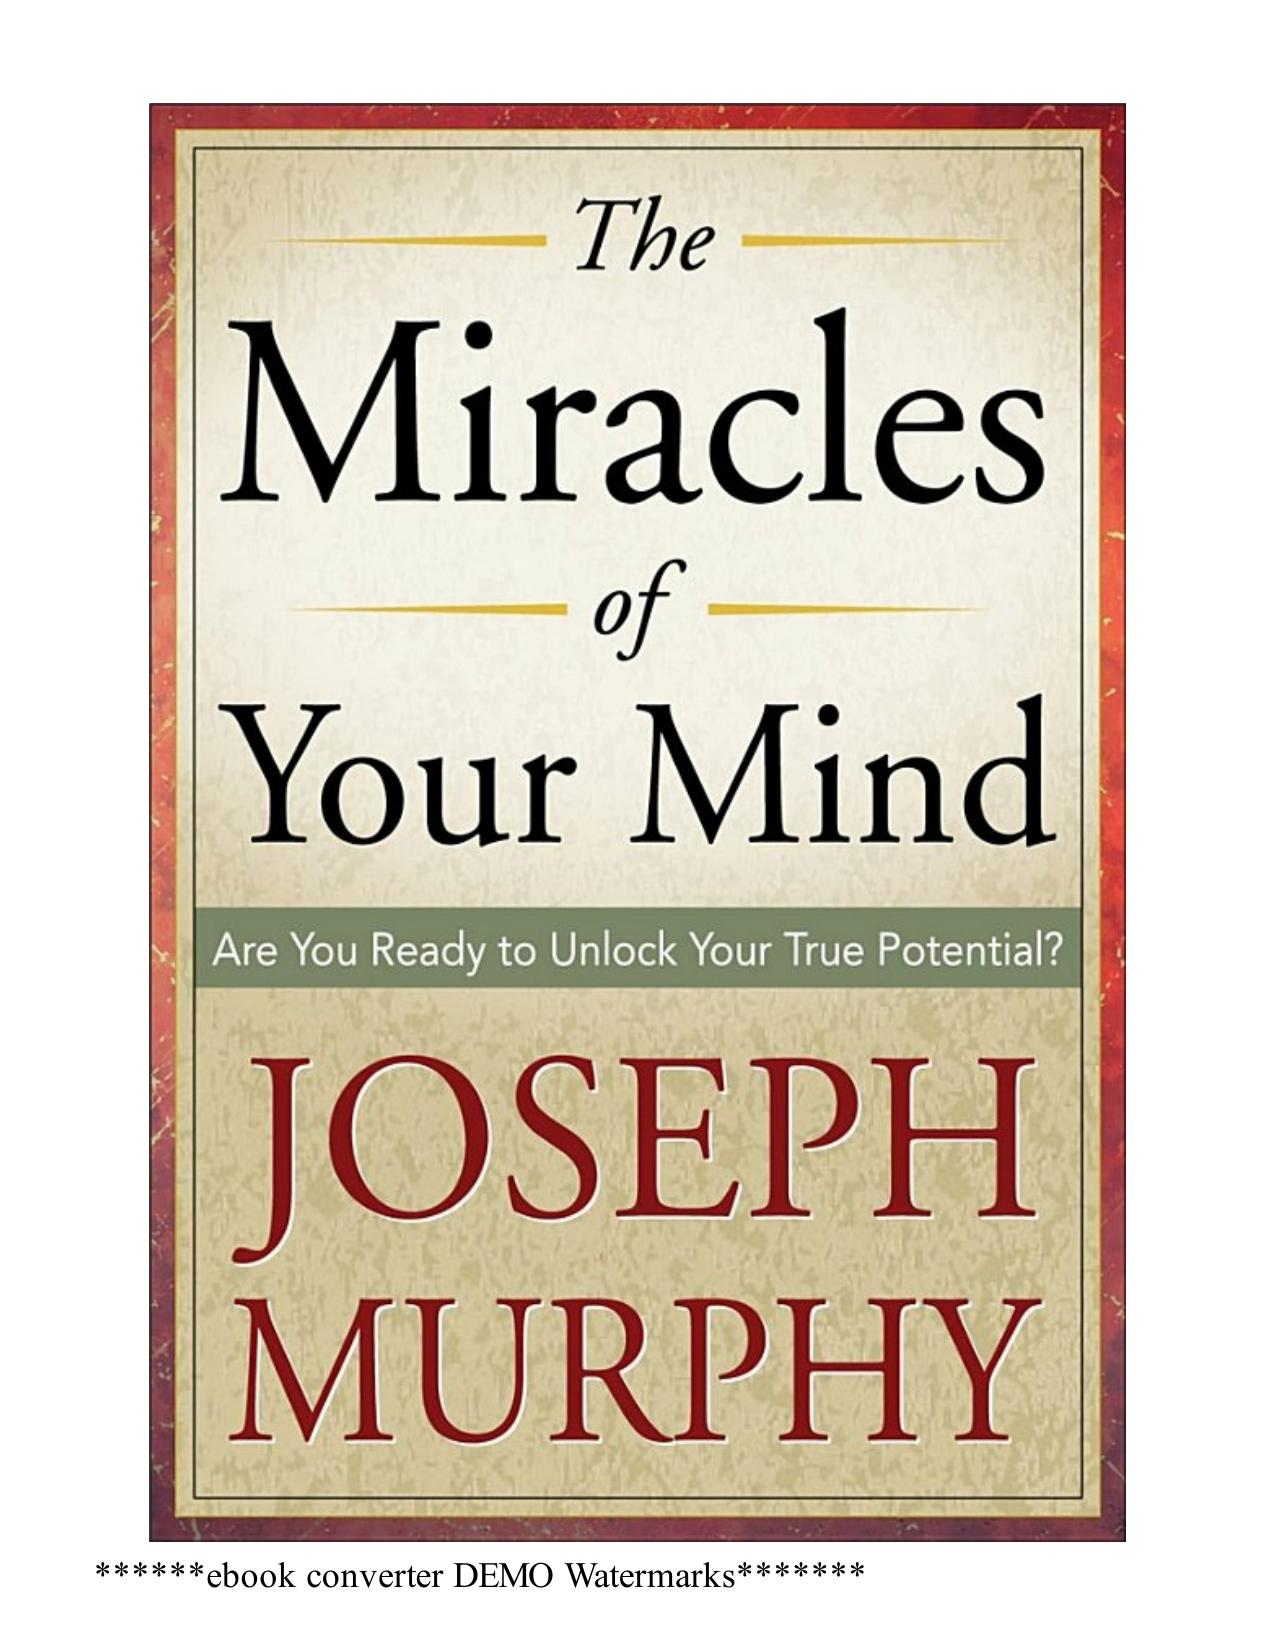 The Miracles of Your Mind by Joseph Murphy